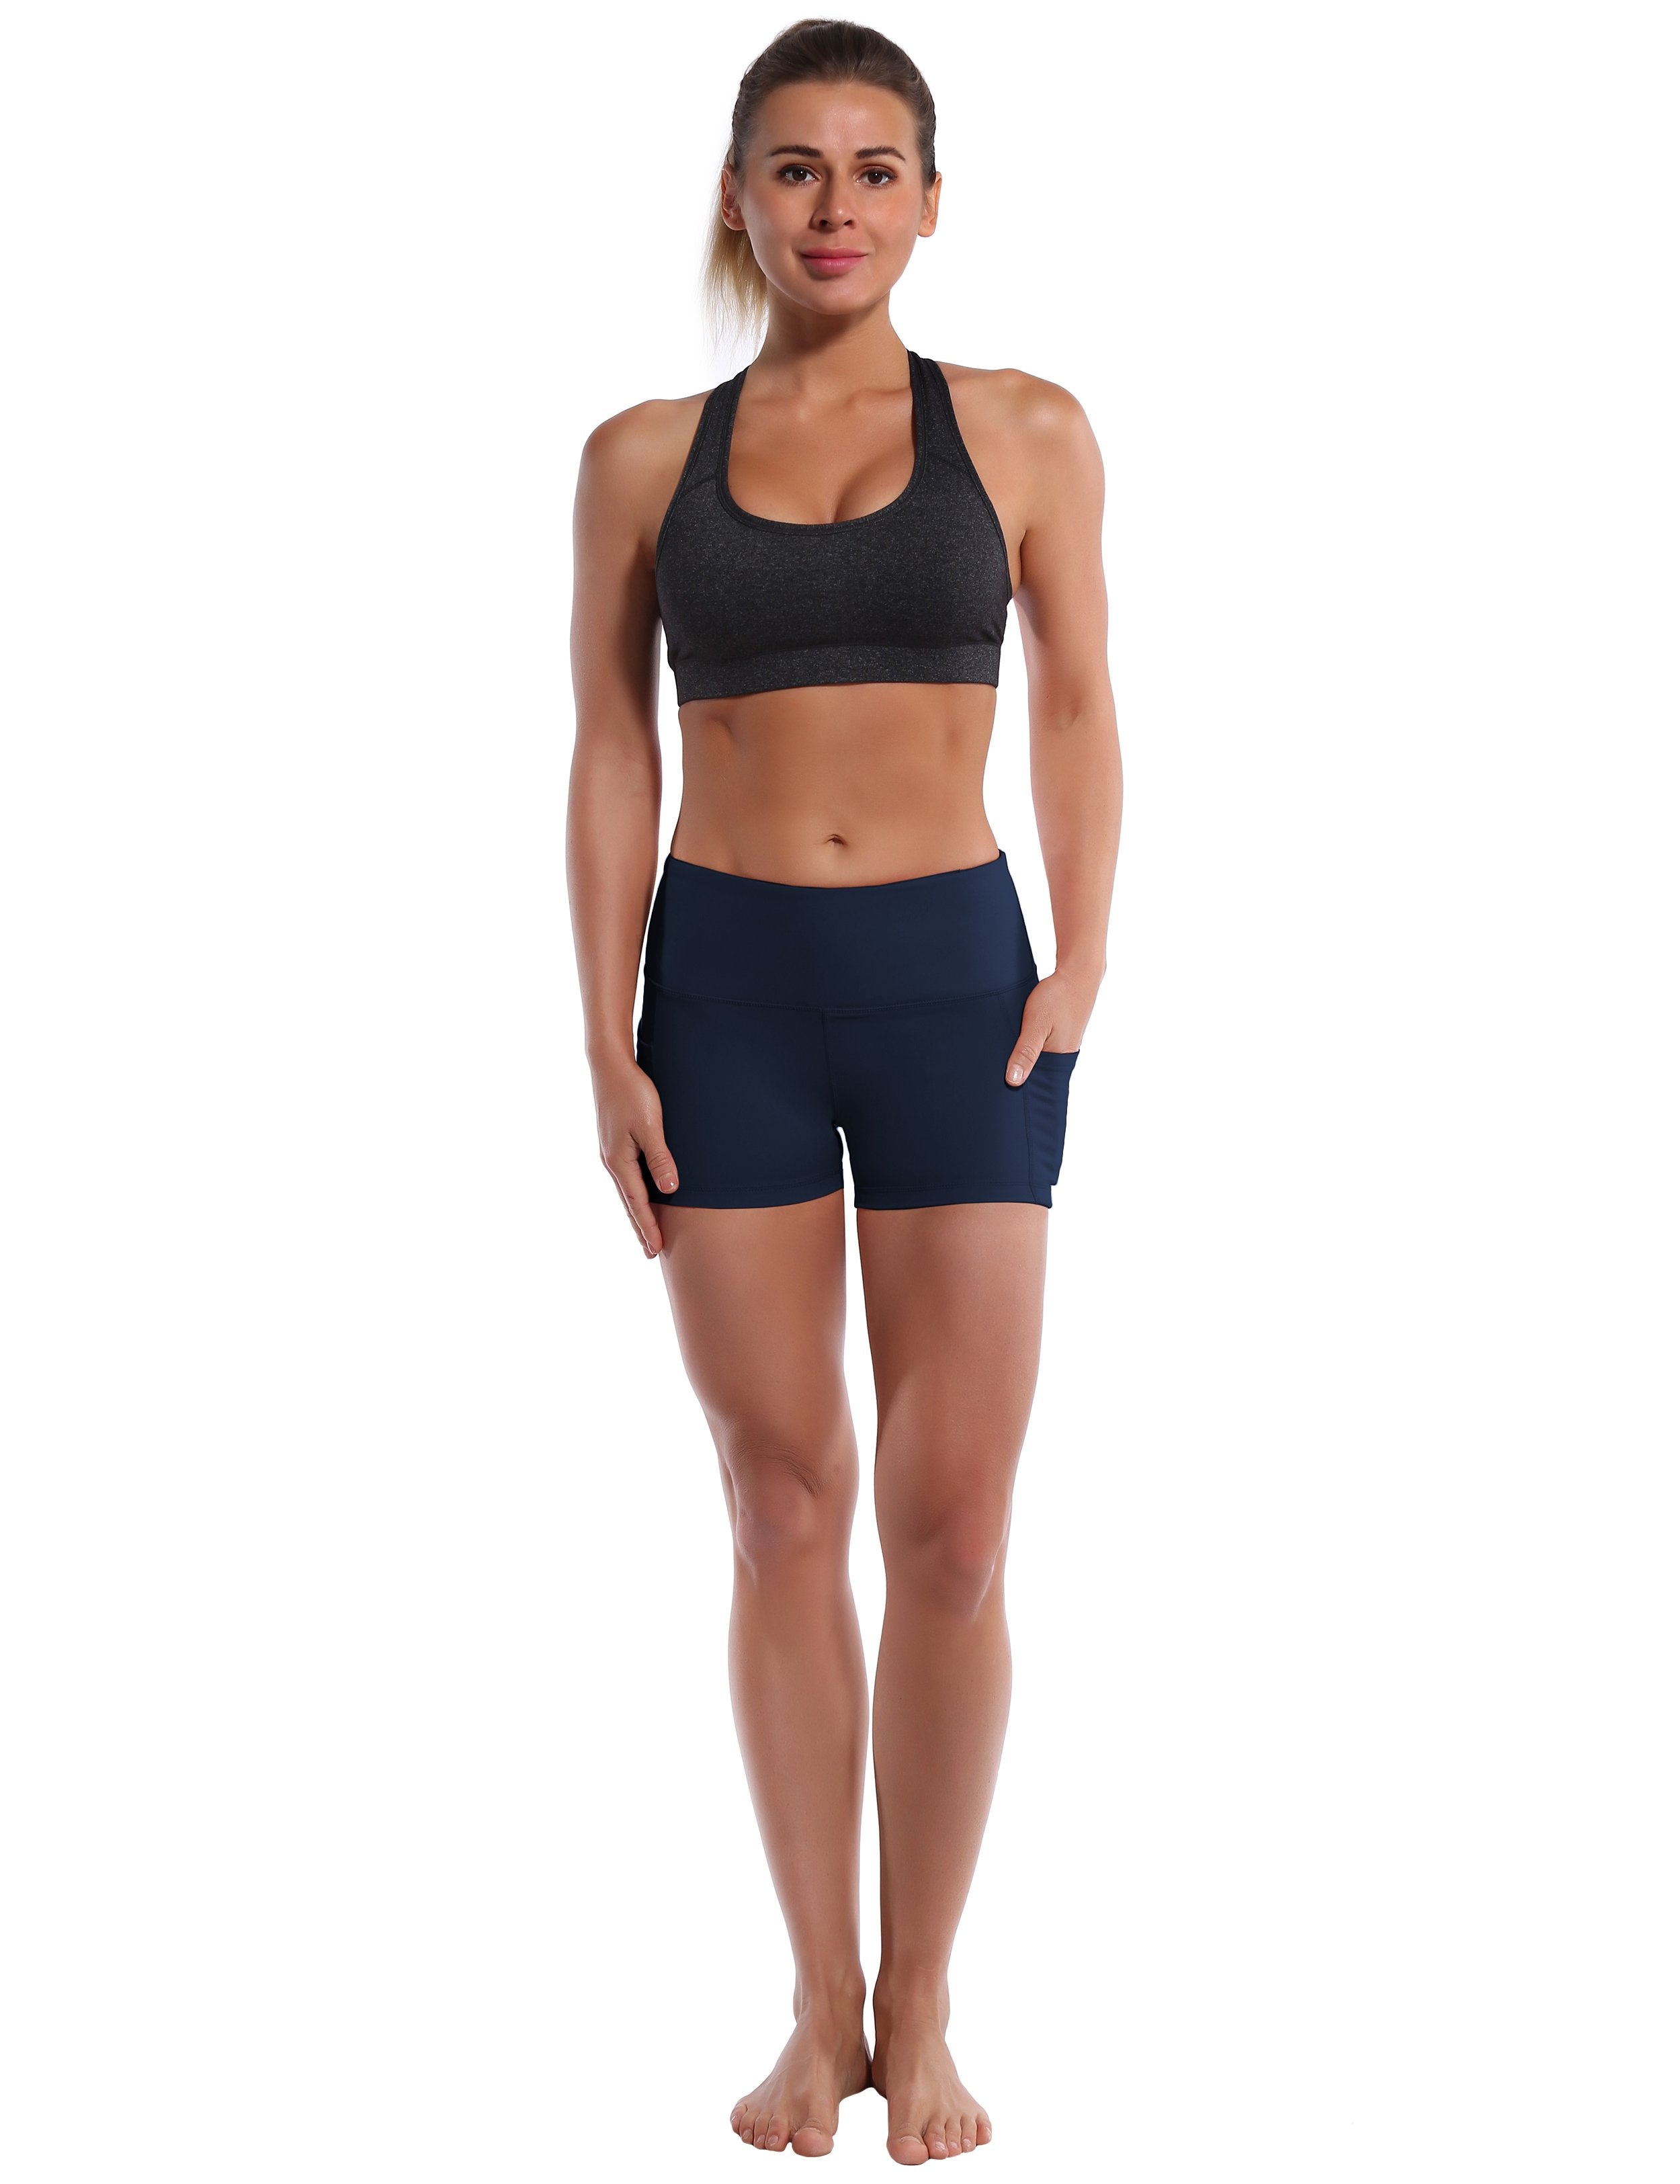 2.5" Side Pockets Golf Shorts darknavy Sleek, soft, smooth and totally comfortable: our newest sexy style is here. Softest-ever fabric High elasticity High density 4-way stretch Fabric doesn't attract lint easily No see-through Moisture-wicking Machine wash 78% Polyester, 22% Spandex